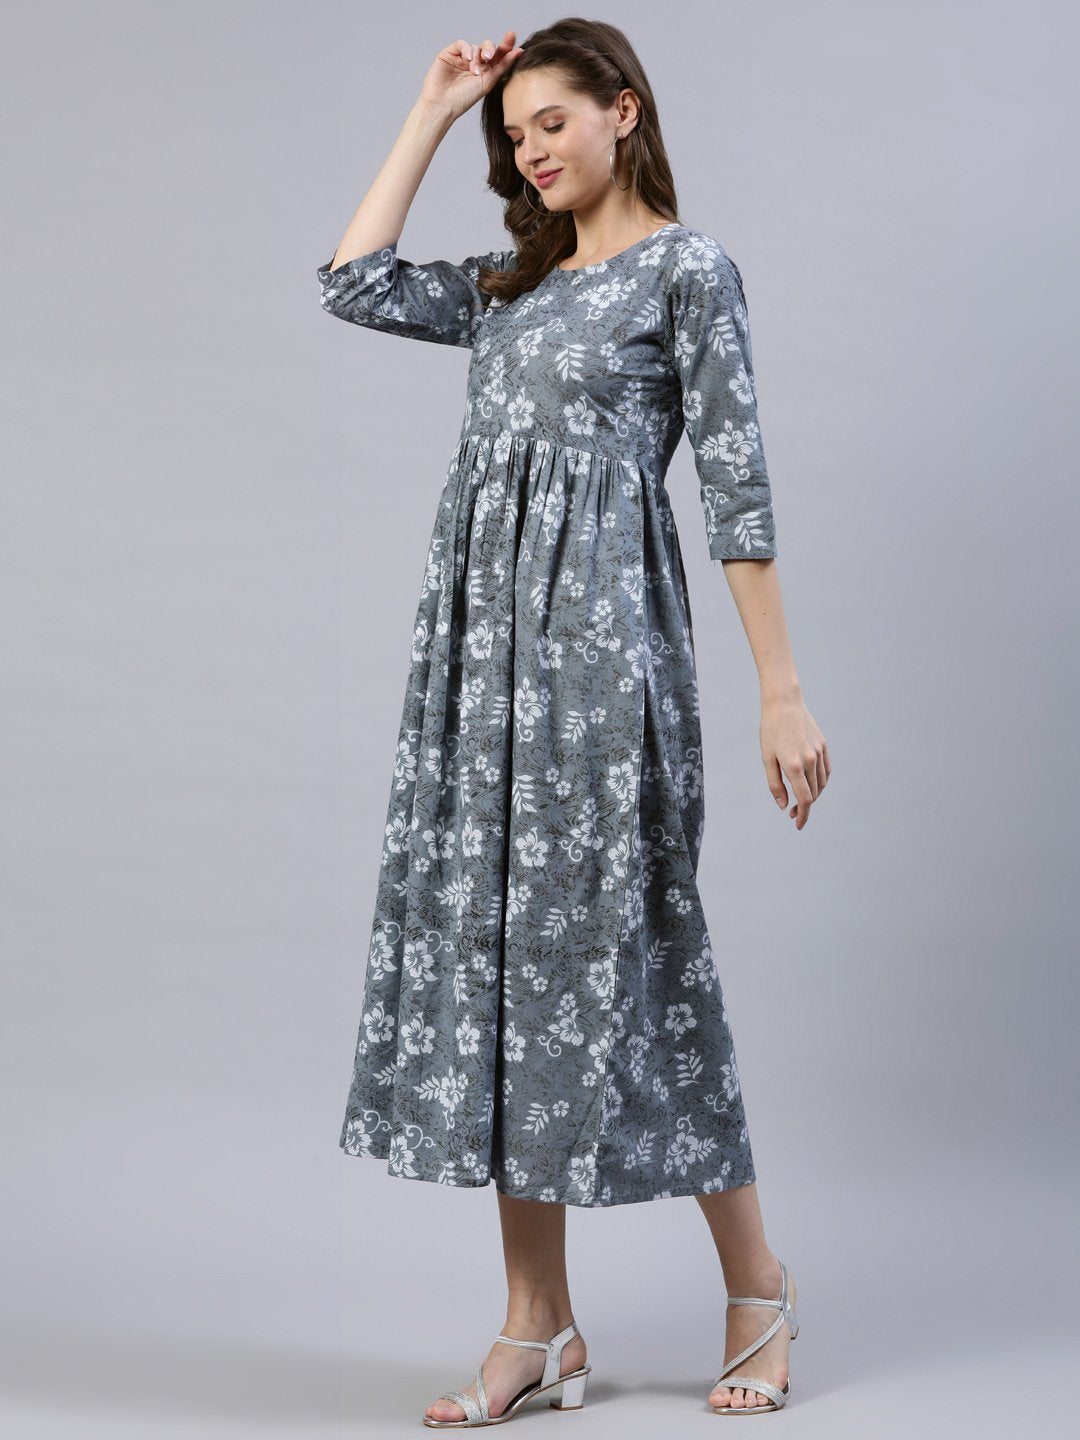 Women's Grey Floral Printed Dress With Three Quarter Sleeves - Nayo Clothing